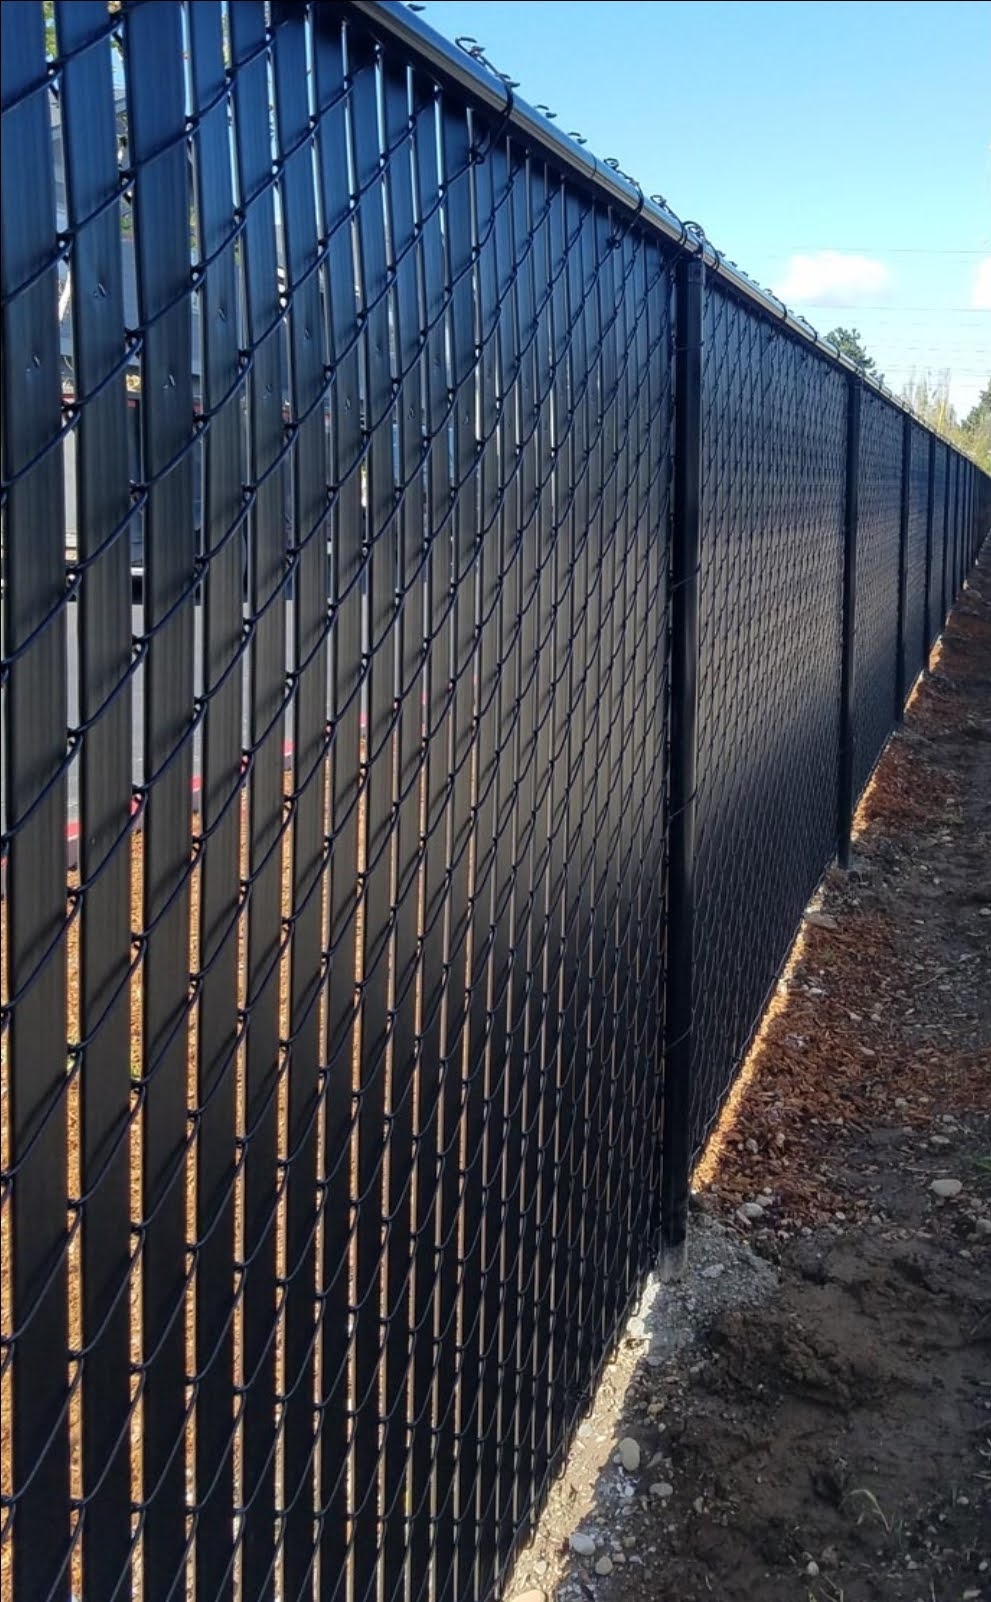 VINYL COATED STEEL CHAIN LINK FENCE BLACK WITH PRIVACY SLATS.